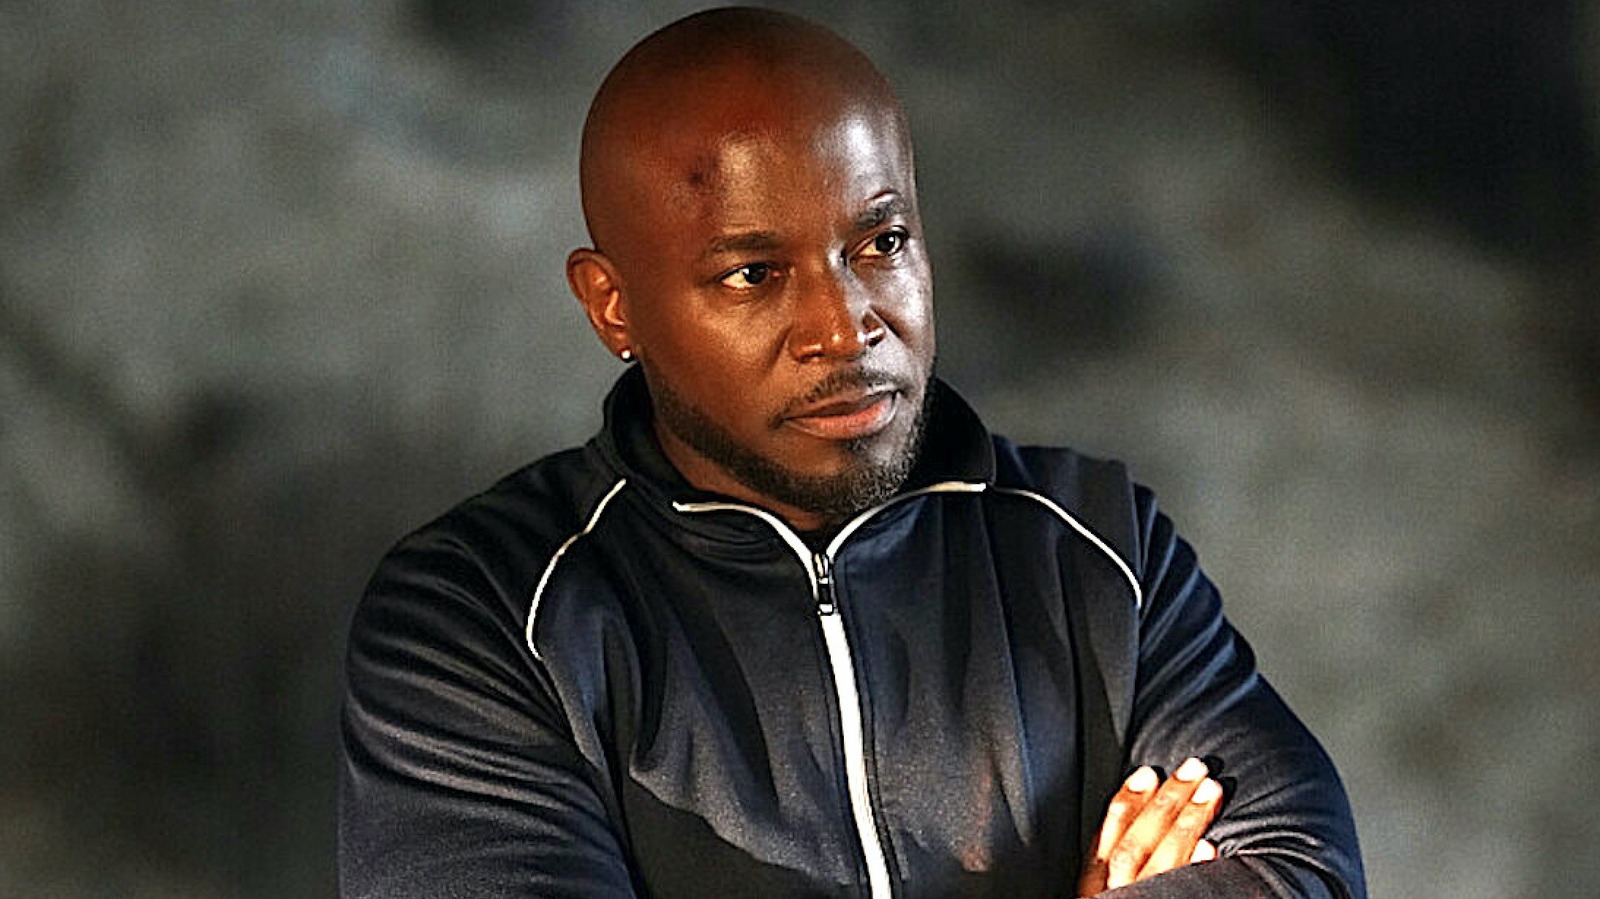 Is Taye Diggs Really Leaving All American After That Explosive Death?